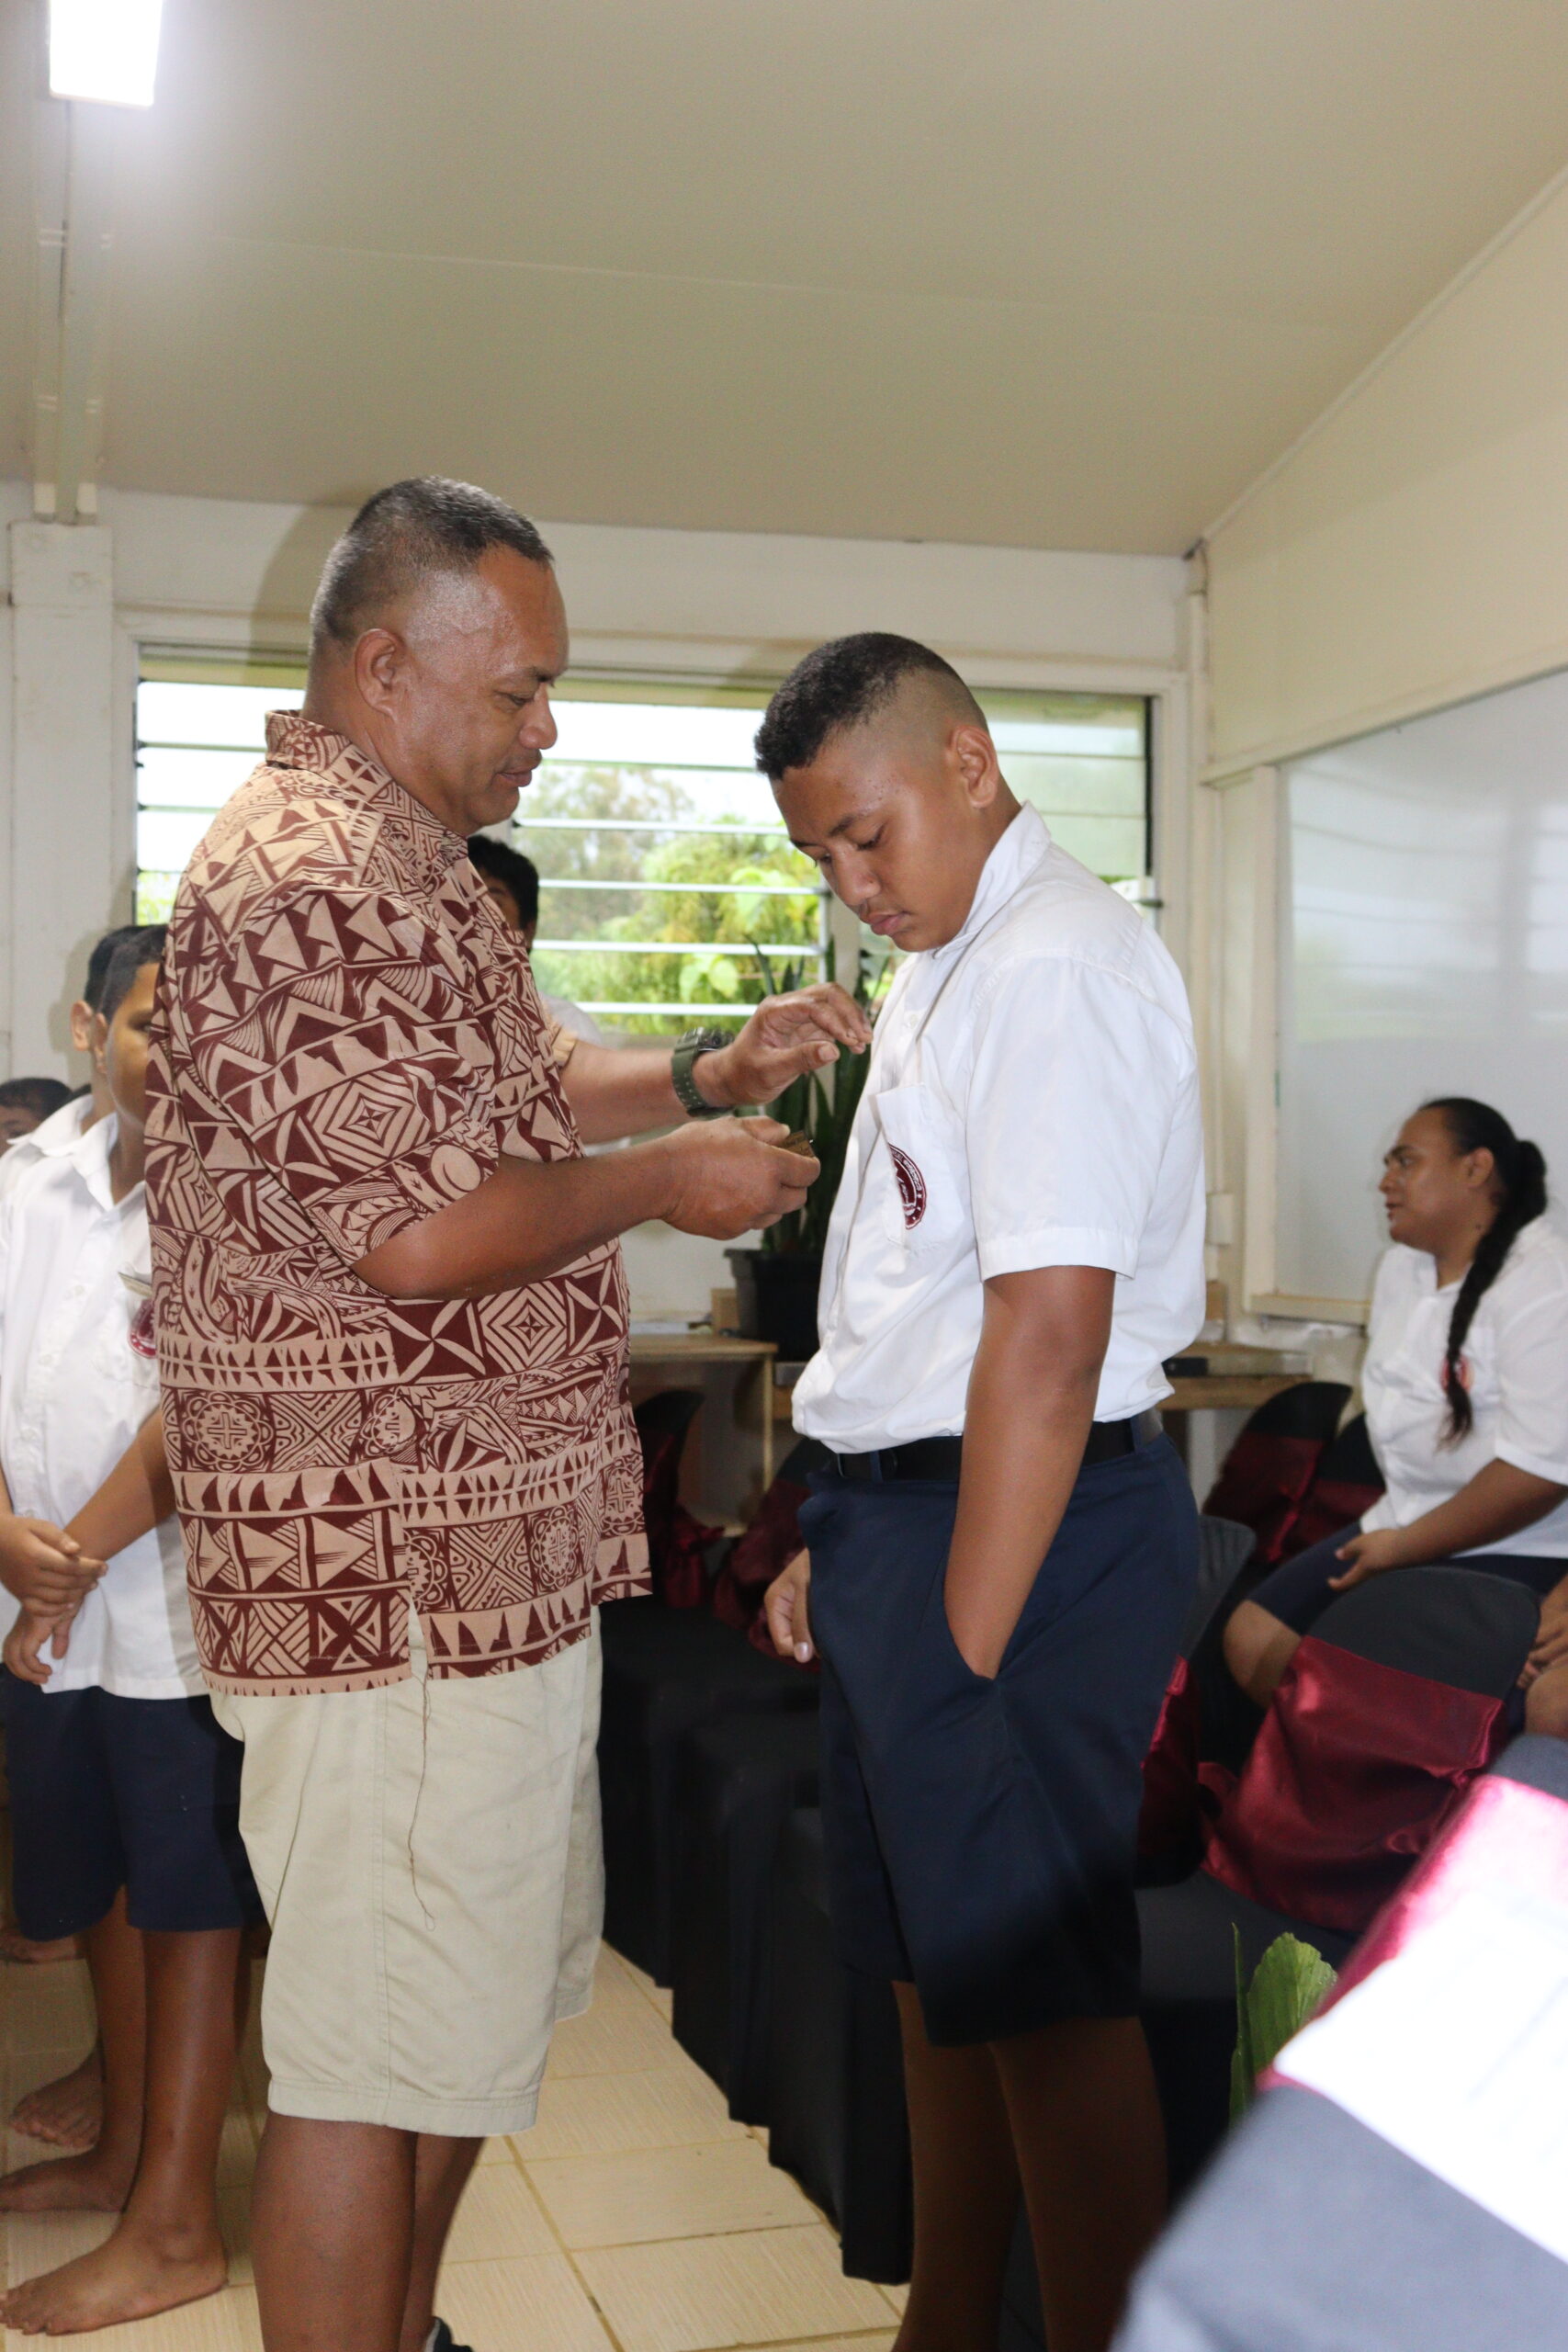 Mangaia School leaders take charge after weather delays